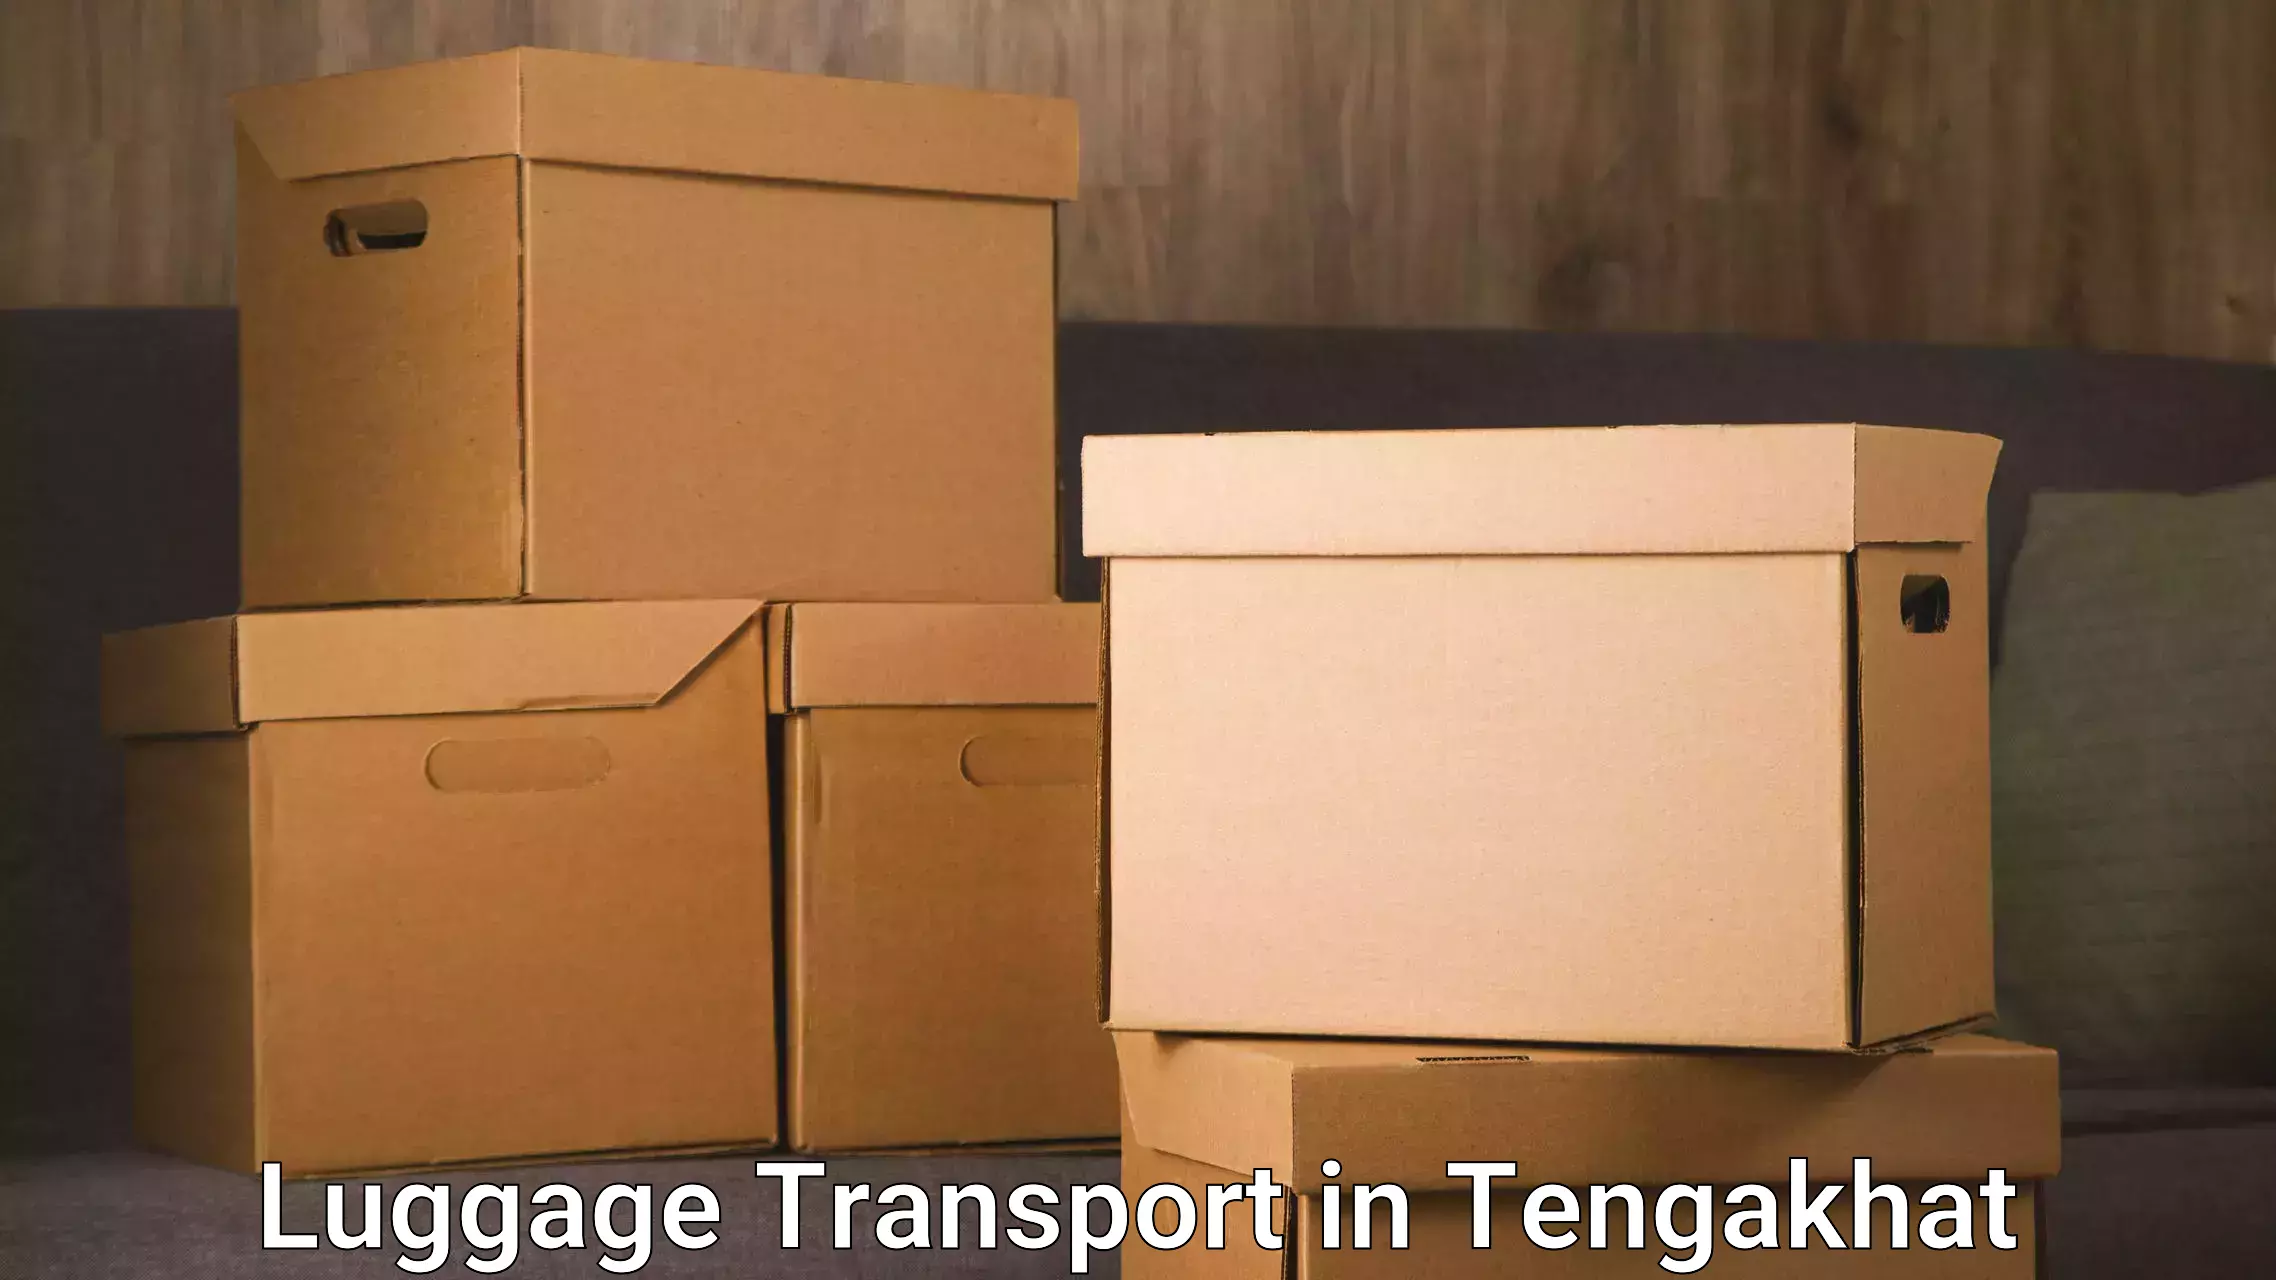 Simplified luggage transport in Tengakhat